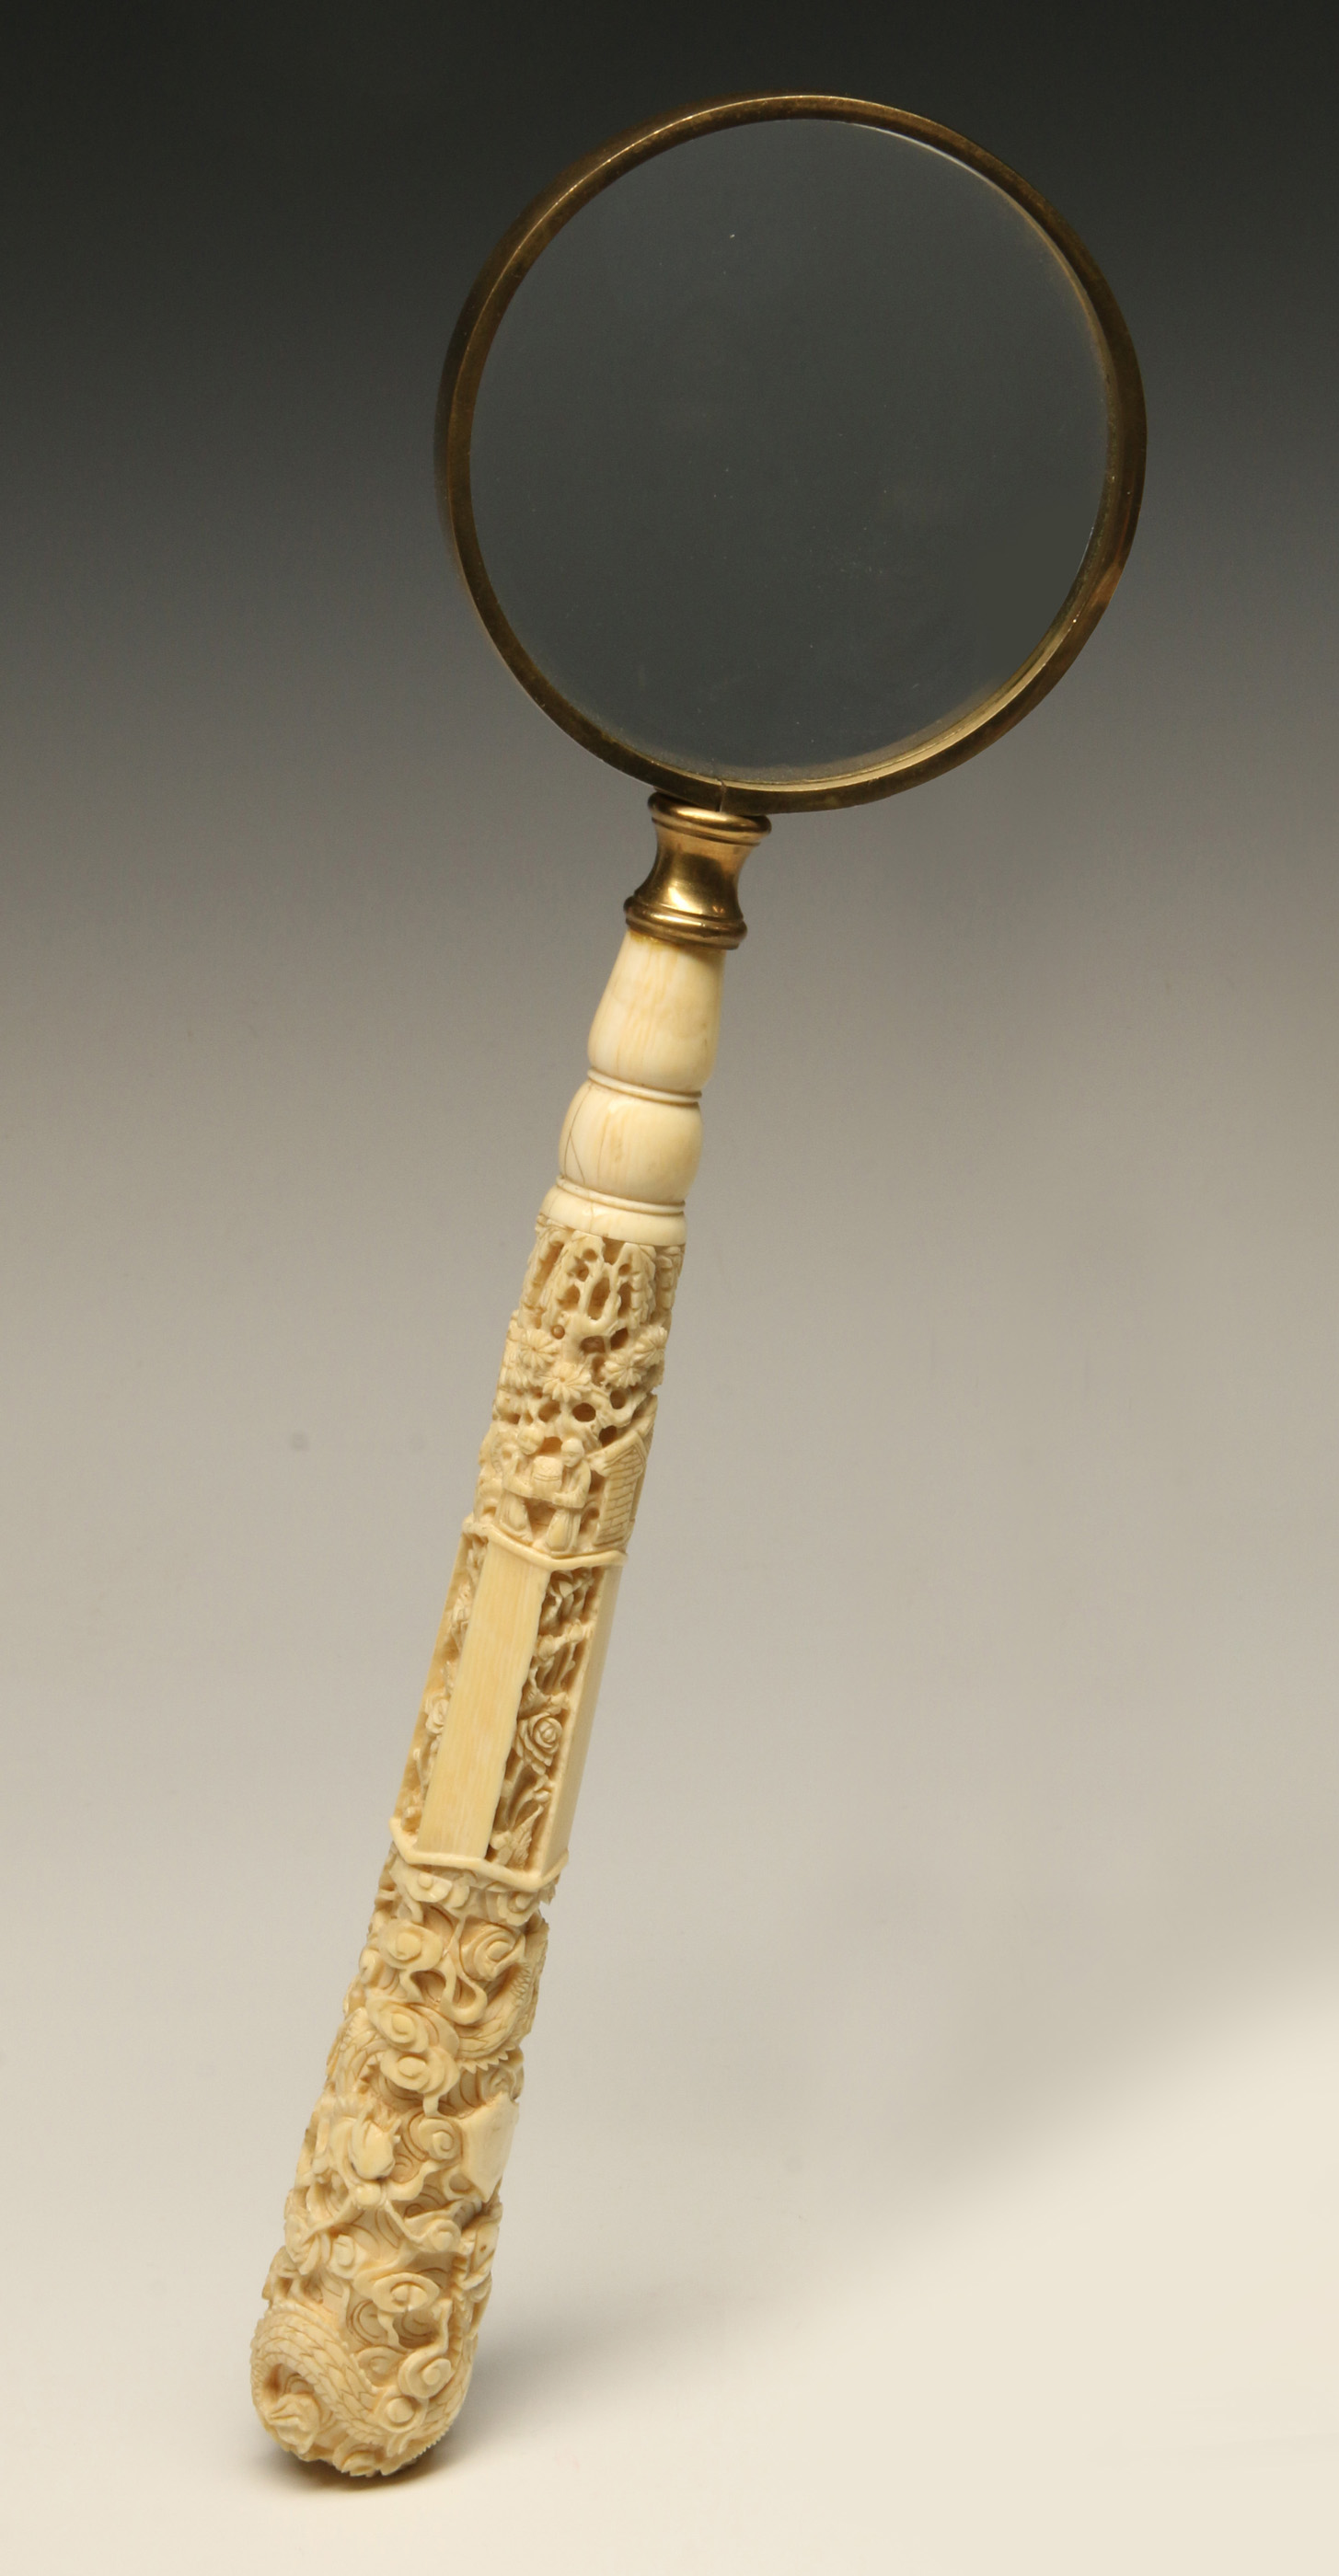 AN ANTIQUE MAGNIFYING GLASS WITH CARVED IVORY